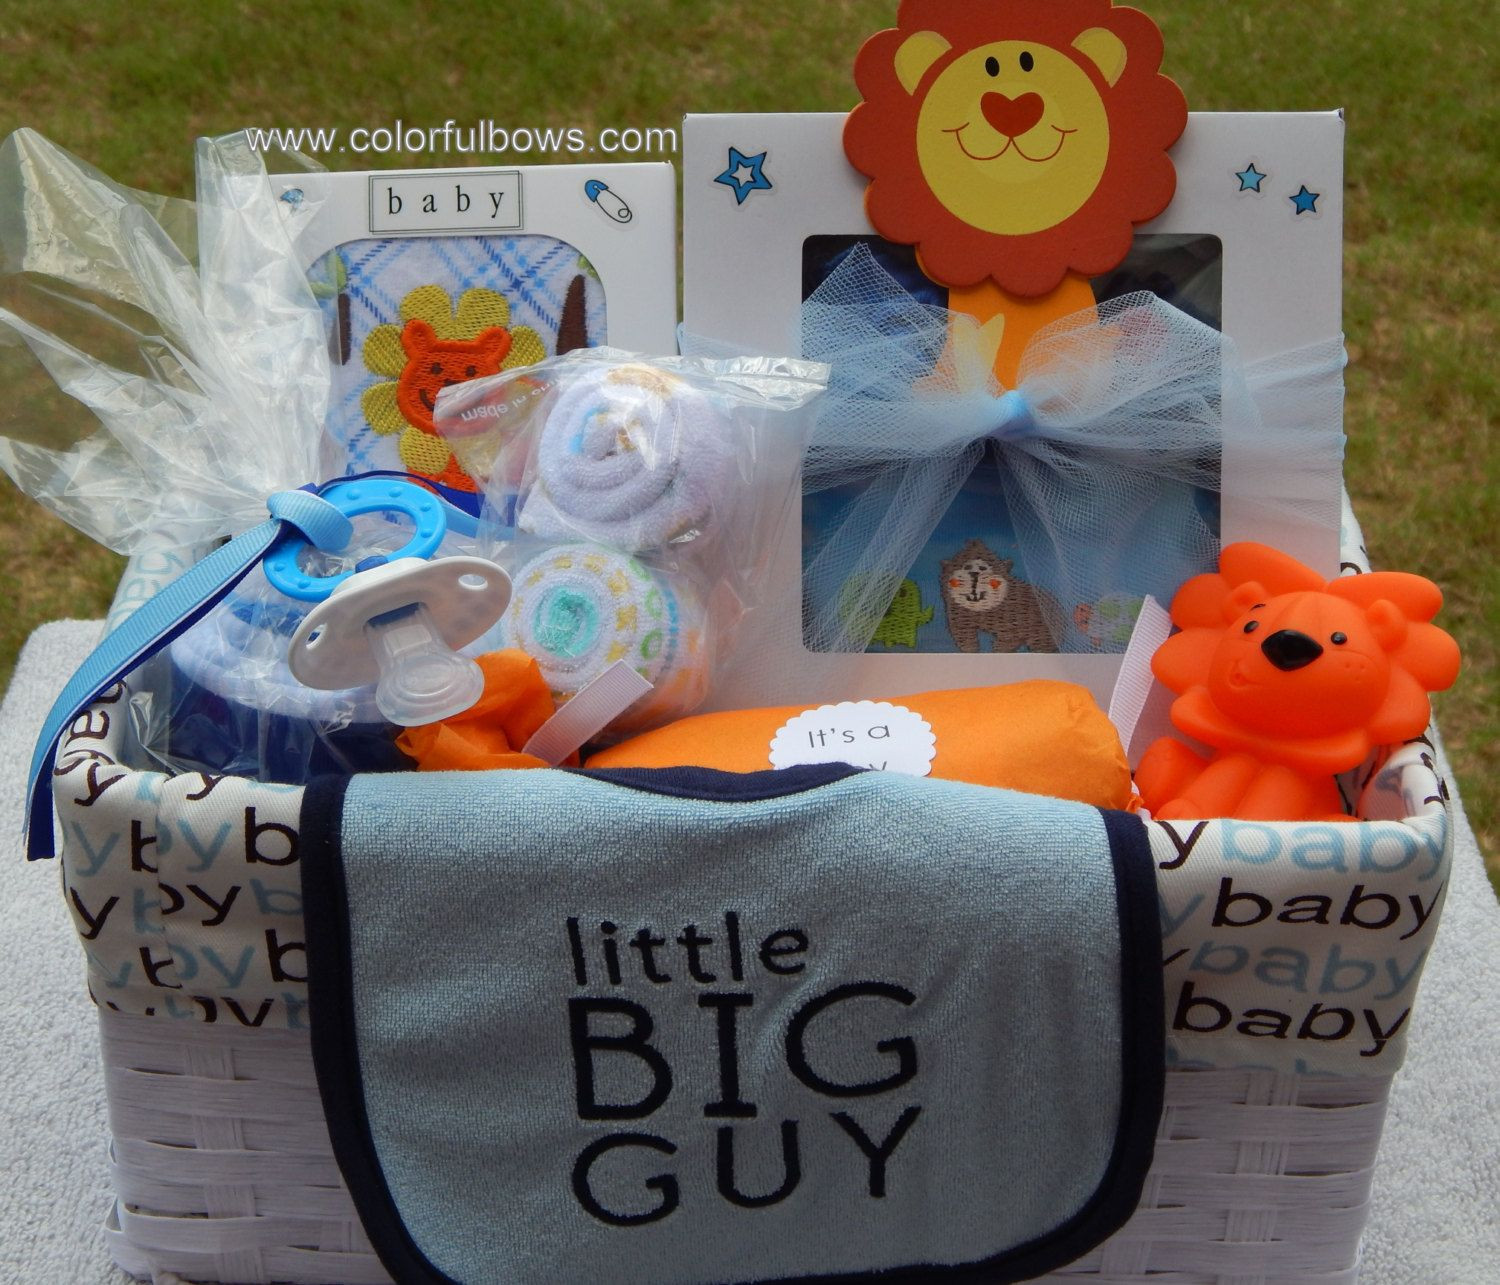 Unique Gift Ideas For Boys
 Premium Little Big Guy Baby Boy Gift Basket READY TO